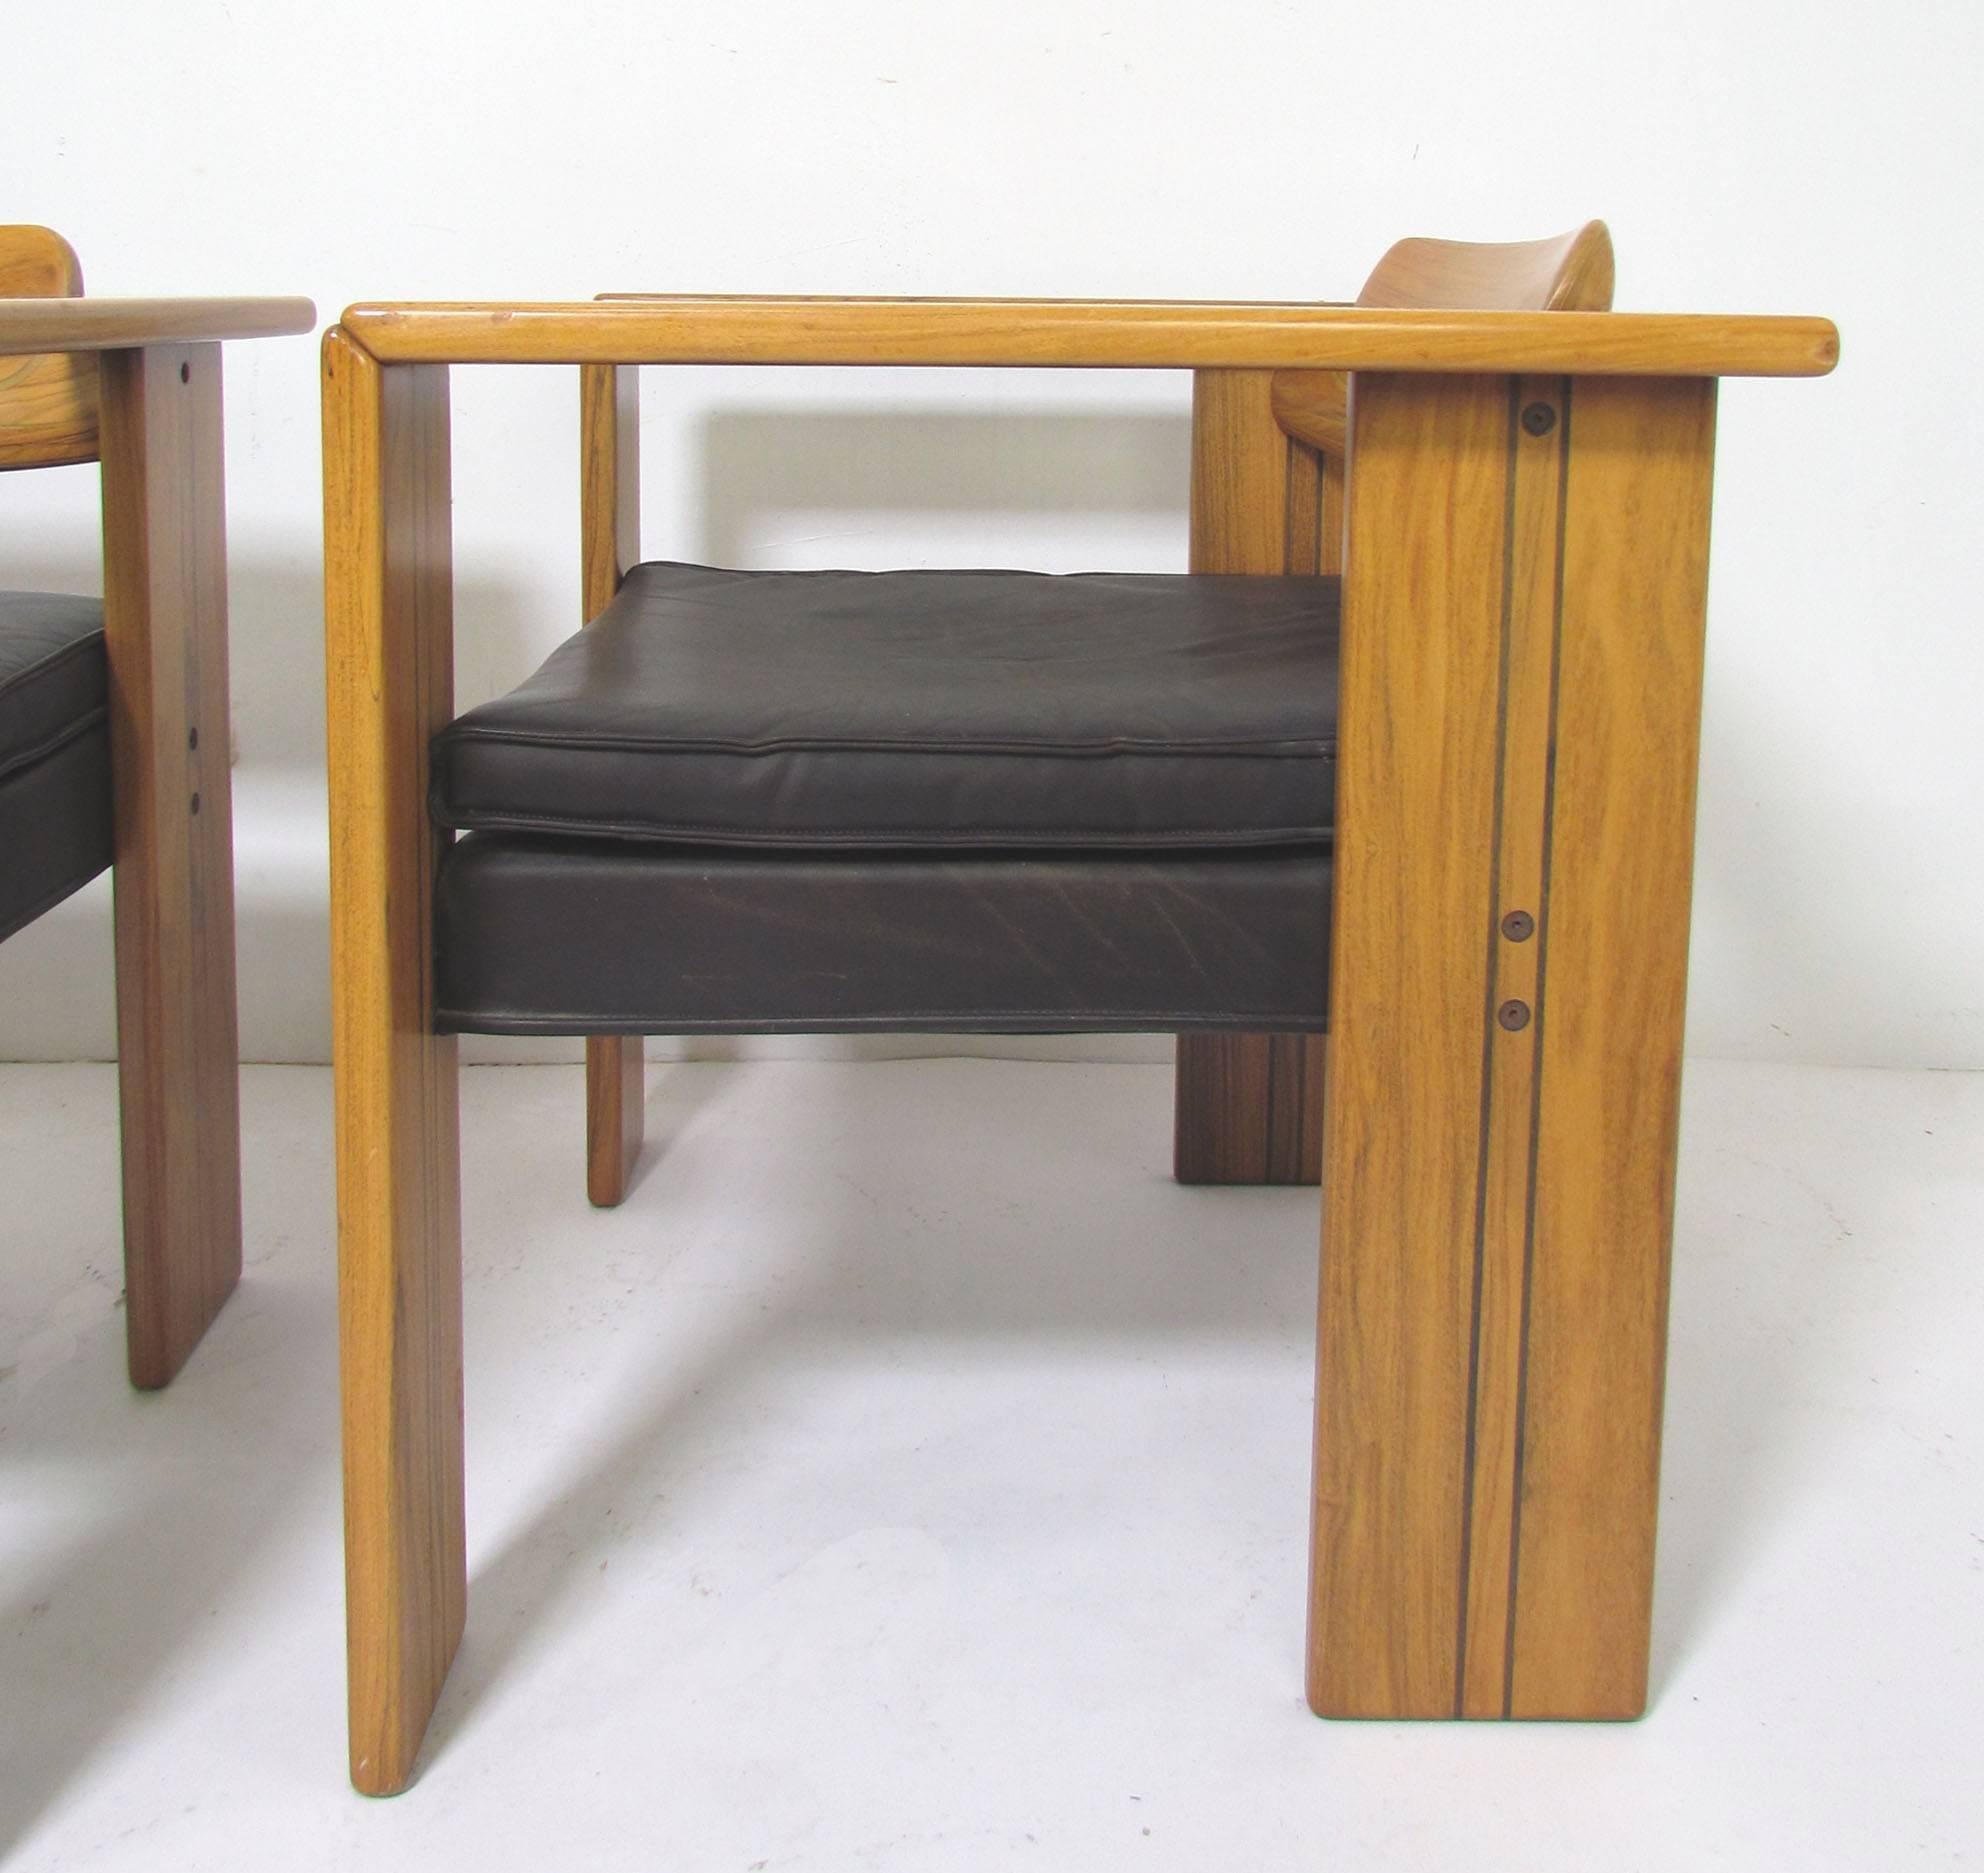 Set of six dining chairs of inlaid walnut, original leather seat cushions, designed by Afra and Tobia Scarpa for the Artona series by Maxalto, Italy, circa 1970s. 

Arm height is 25".